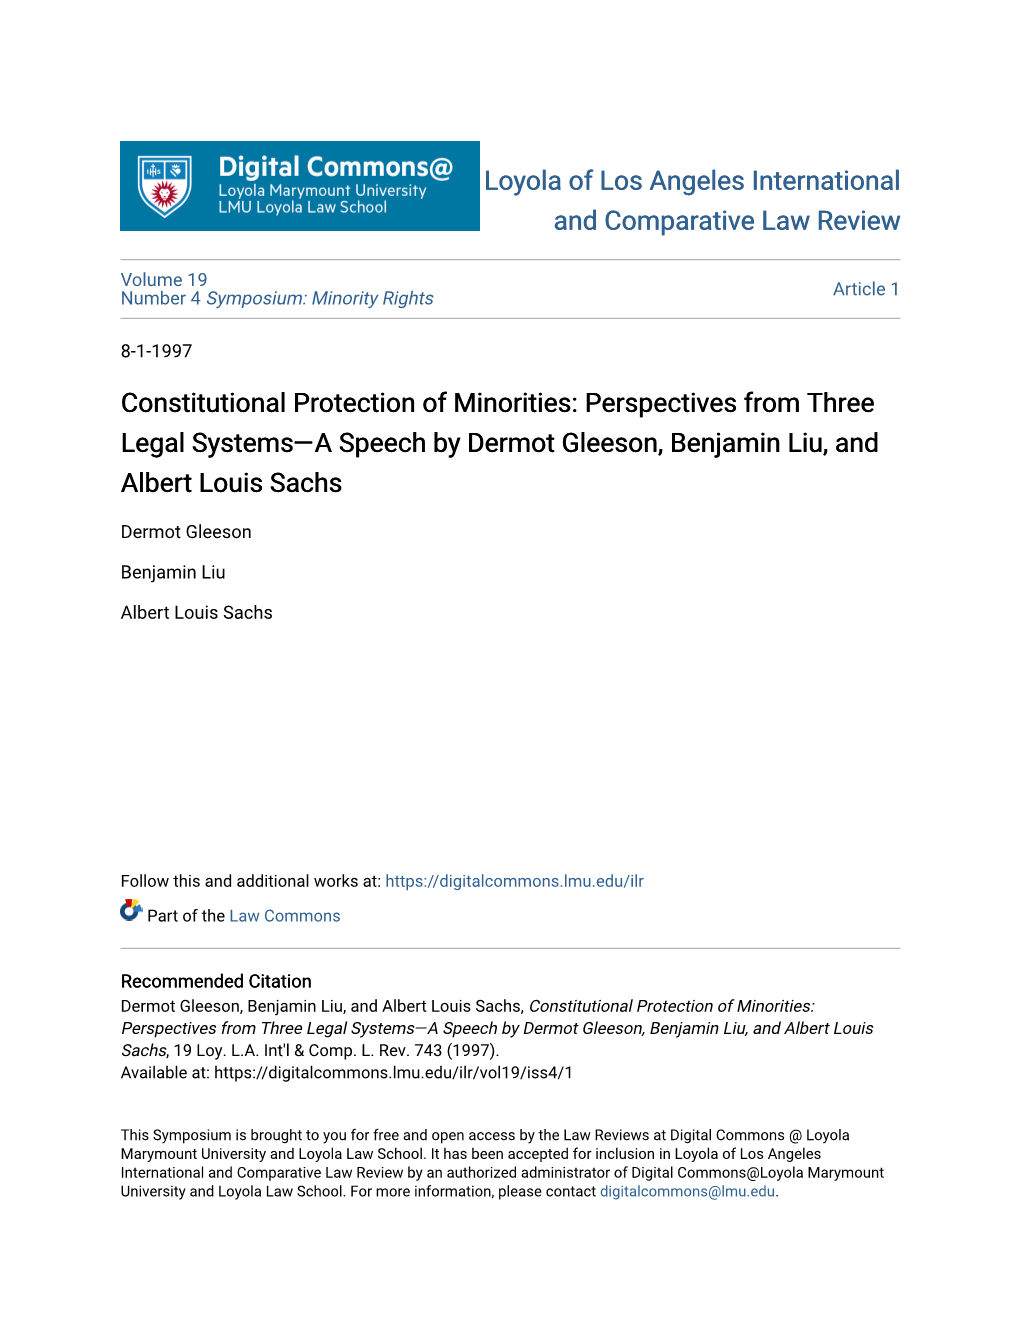 Constitutional Protection of Minorities: Perspectives from Three Legal Systems—A Speech by Dermot Gleeson, Benjamin Liu, and Albert Louis Sachs